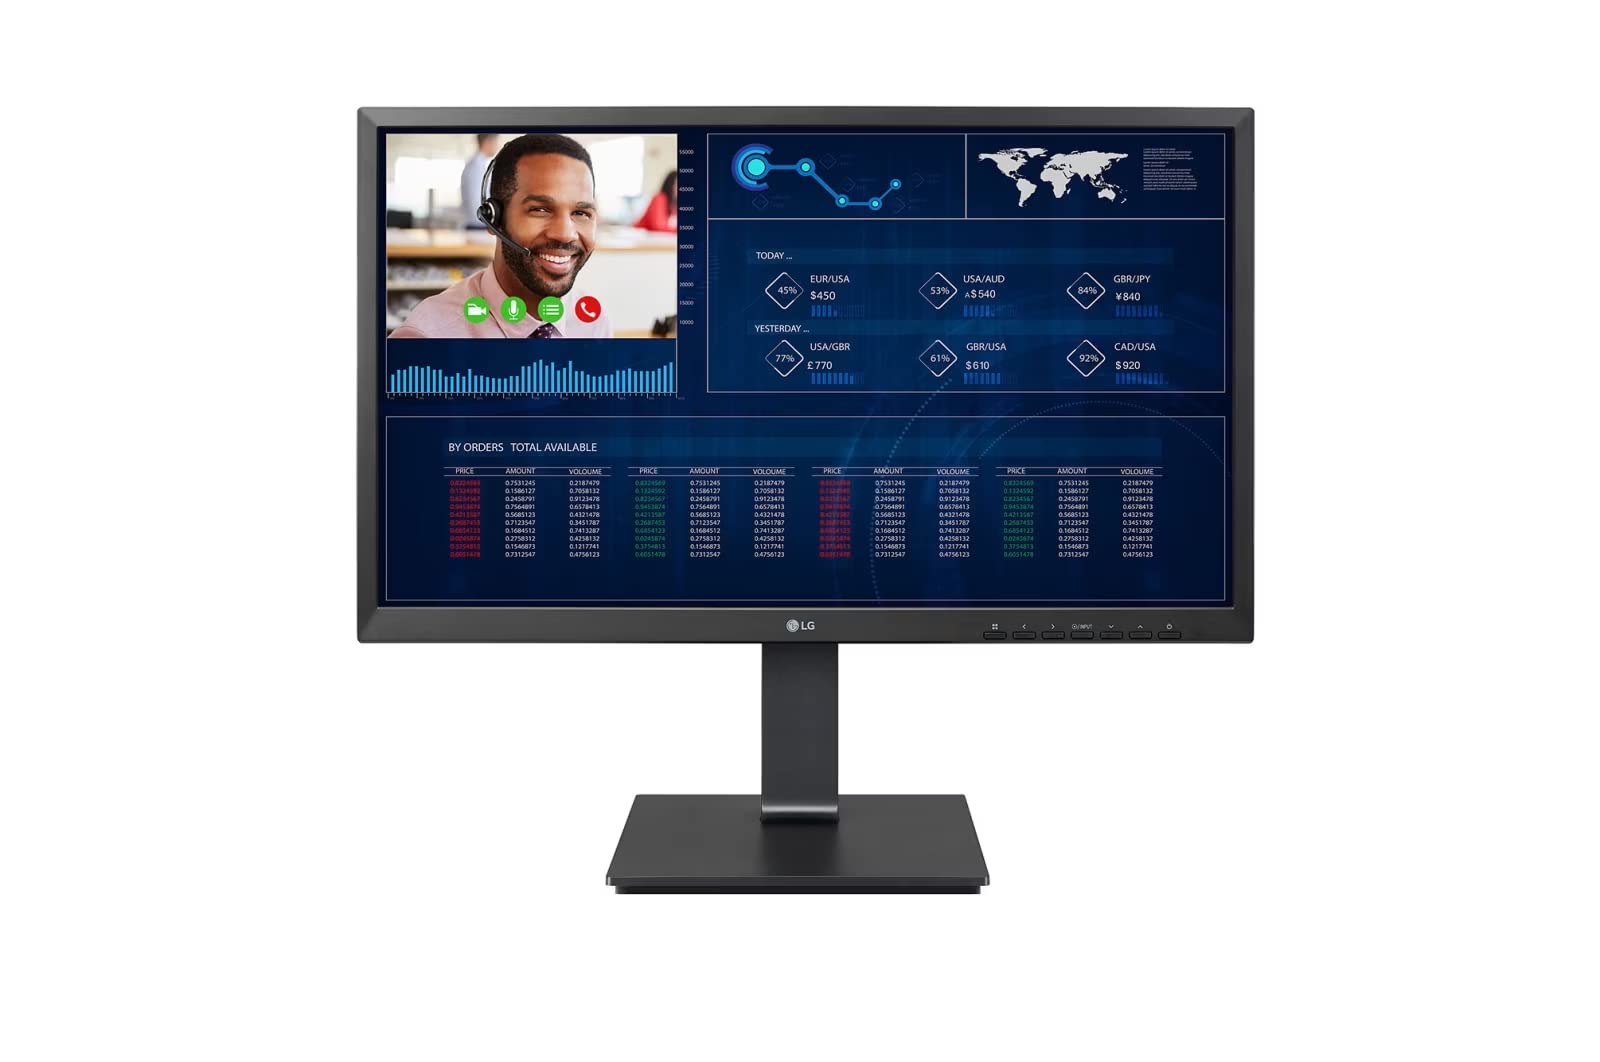 LG 24” 24CN650I-6N FHD IPS All-in-One Thin Client with Quad-core Processor, IGEL® OS, Built-in FHD Webcam & Speaker